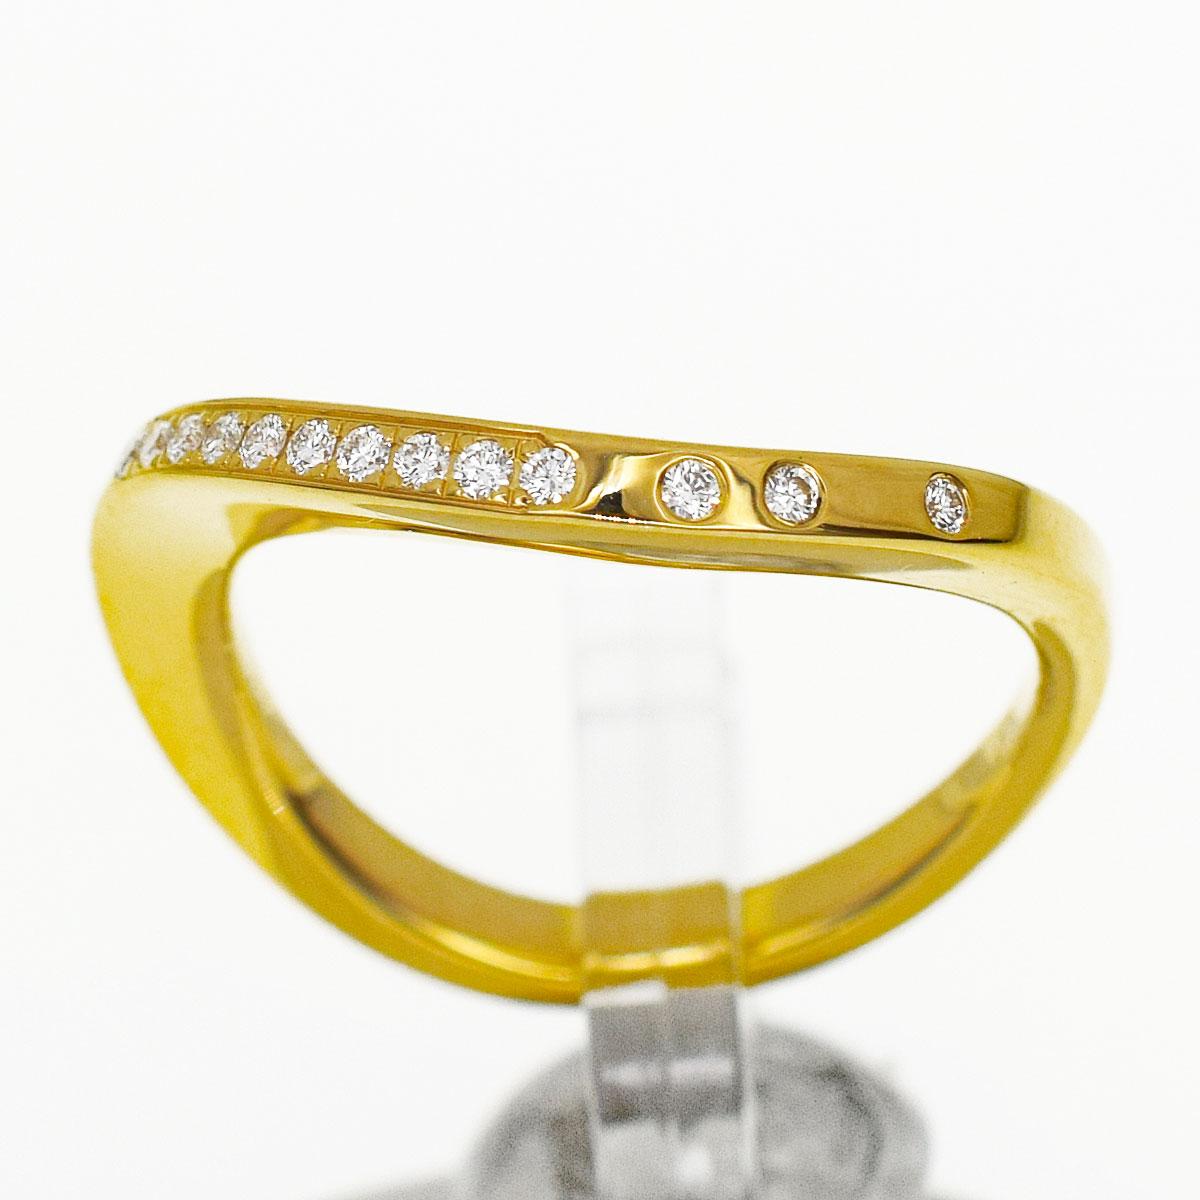 Brand : Cartier
Name : Paris Nouvelle Vague Ring
Material : Diamond, 750 K18 YG Yellow Gold 
Comes with : Cartier Box,Case,, Cartier Certificate (Dec 2013)
Ring size : British & Australian:I 1/2  /   US & Canada:4.5 /  French & Russian:48 / 